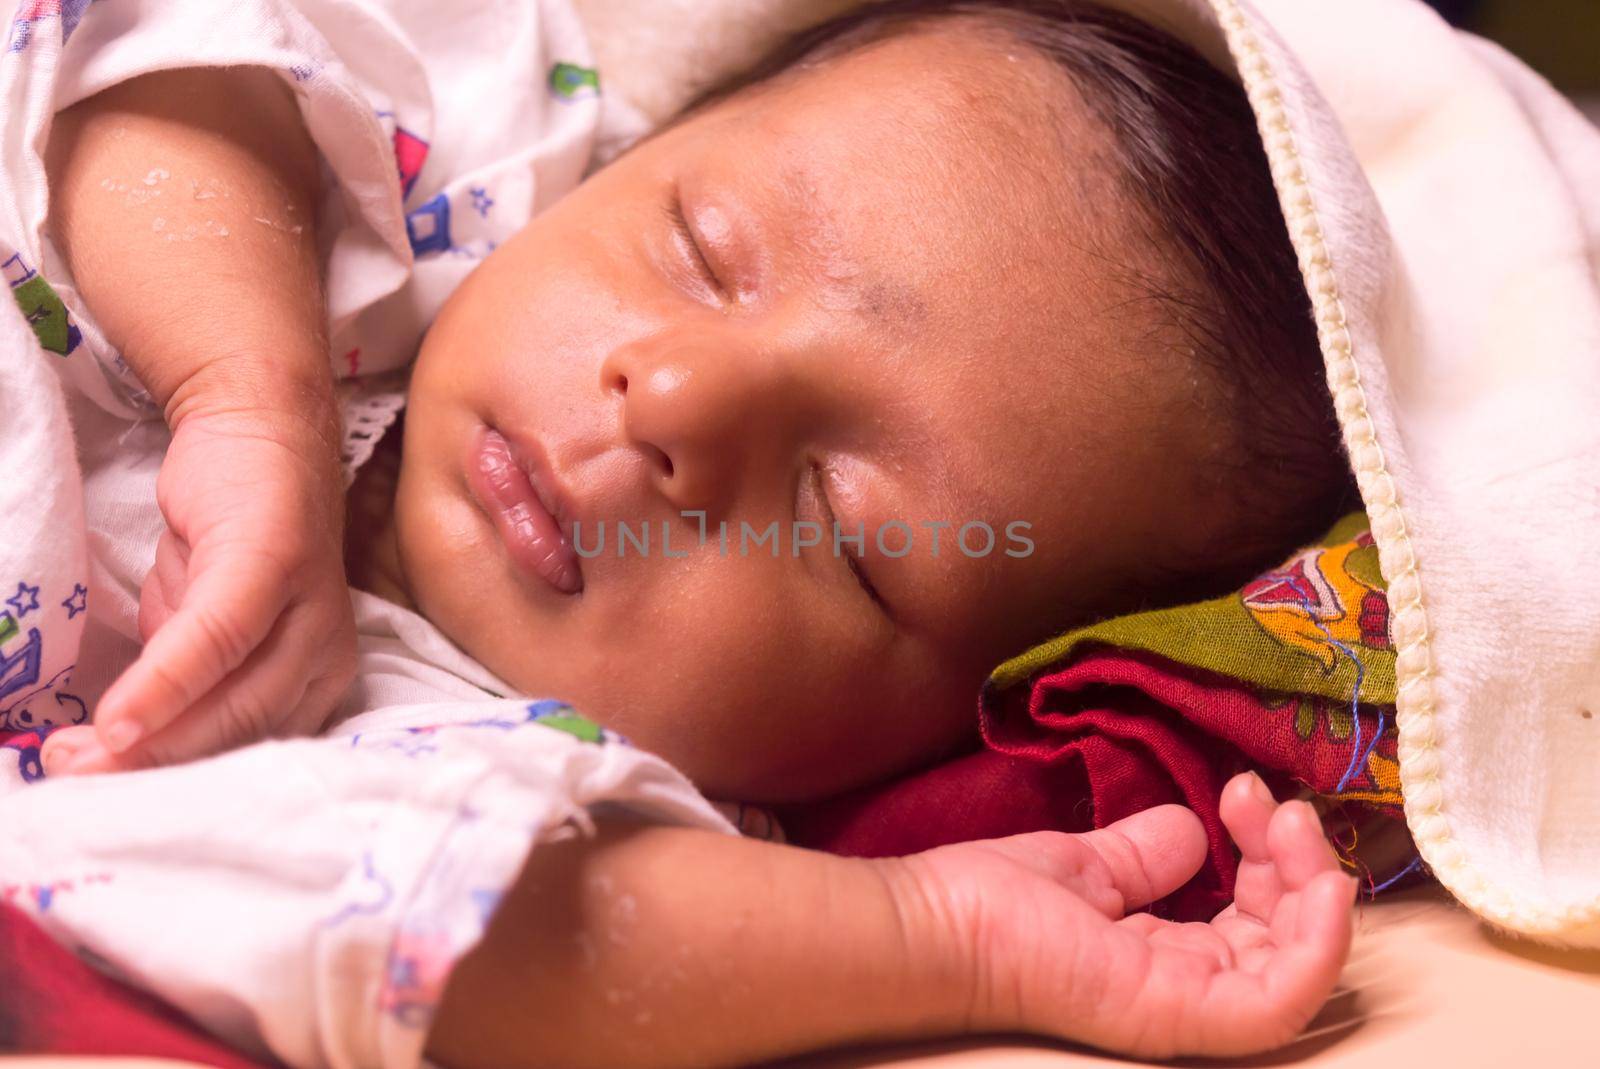 Close up face of cute sleeping newborn baby boy in drowsy eyes with sleepy mood. One month old Sweet infant toddler Closeup portrait. Indian ethnicity. Front view. Child care peace tranquil background